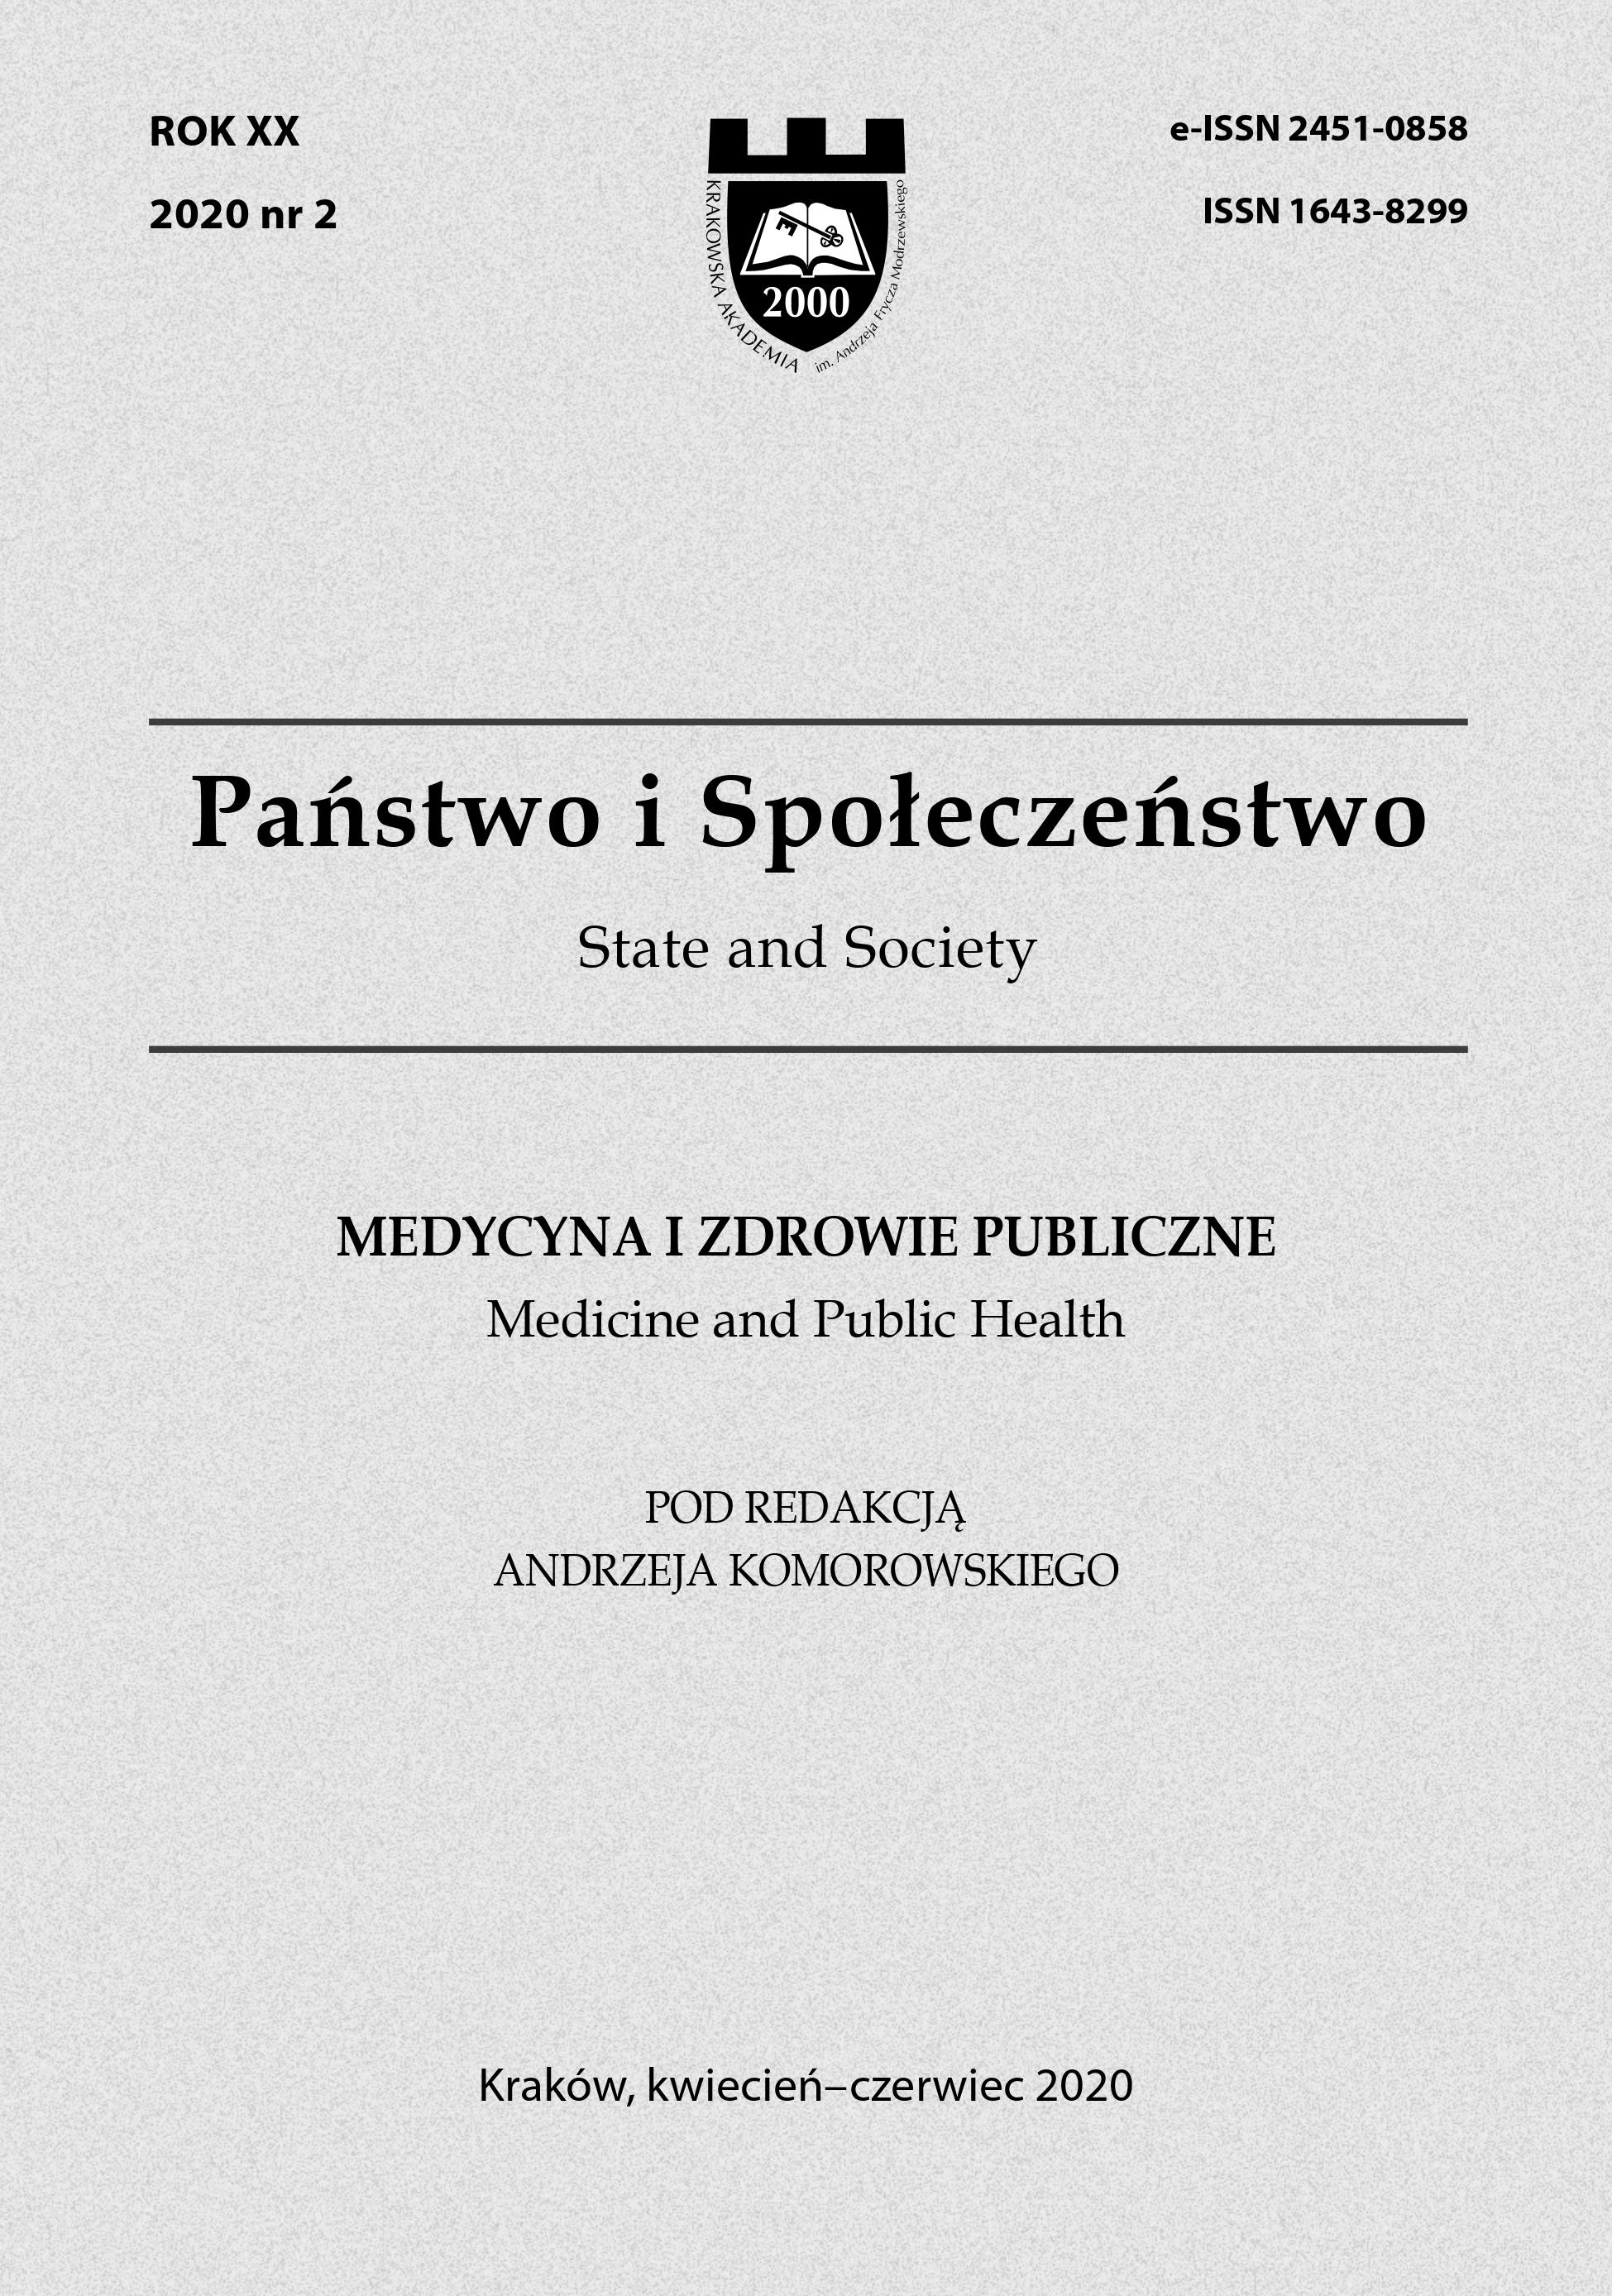 The memory of prof. Stanisław Sporny Cover Image